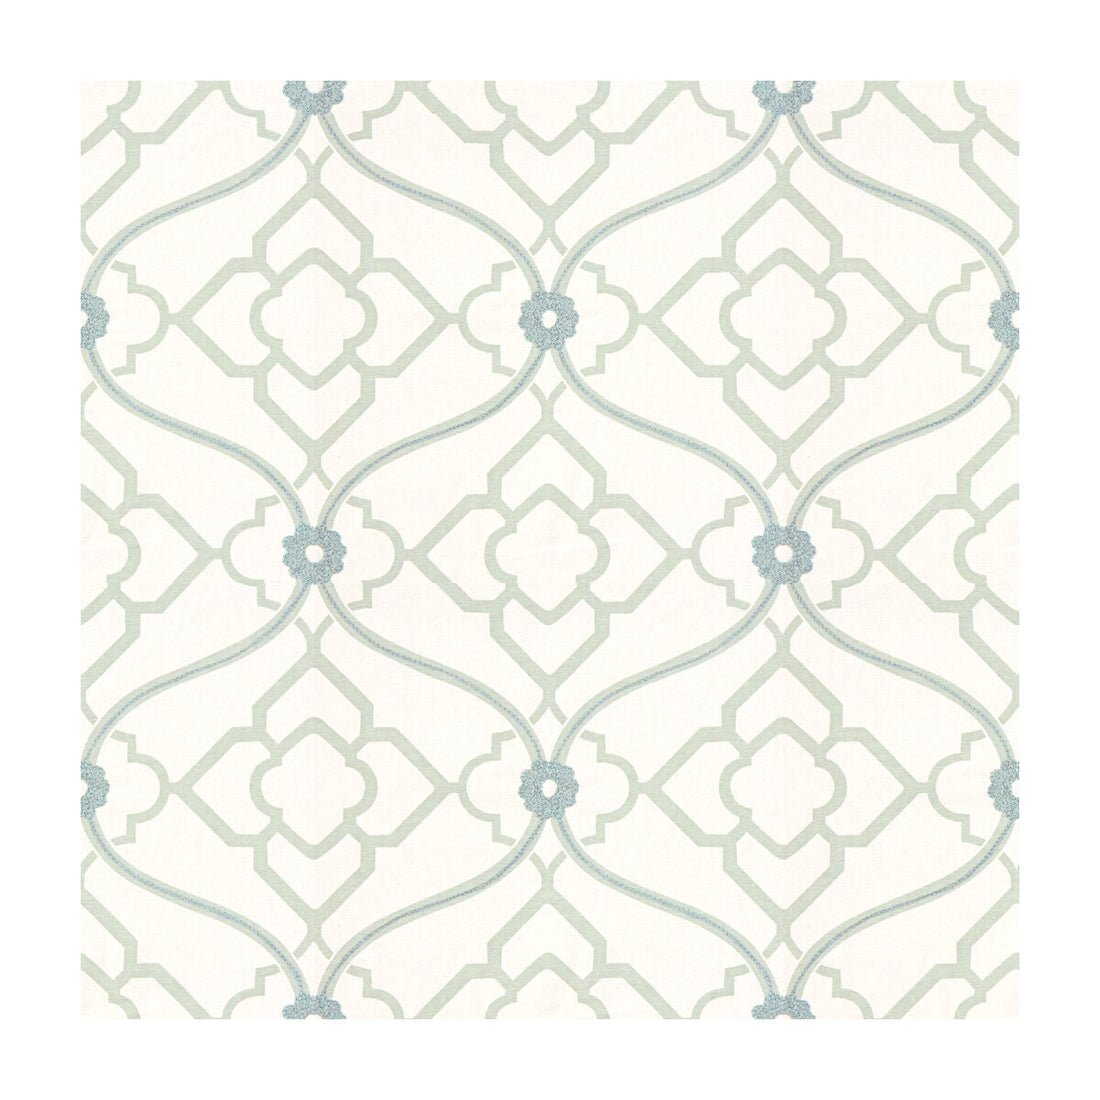 Zuma fabric in spa color - pattern ZUMA.30.0 - by Kravet Design in the Candice Olson collection